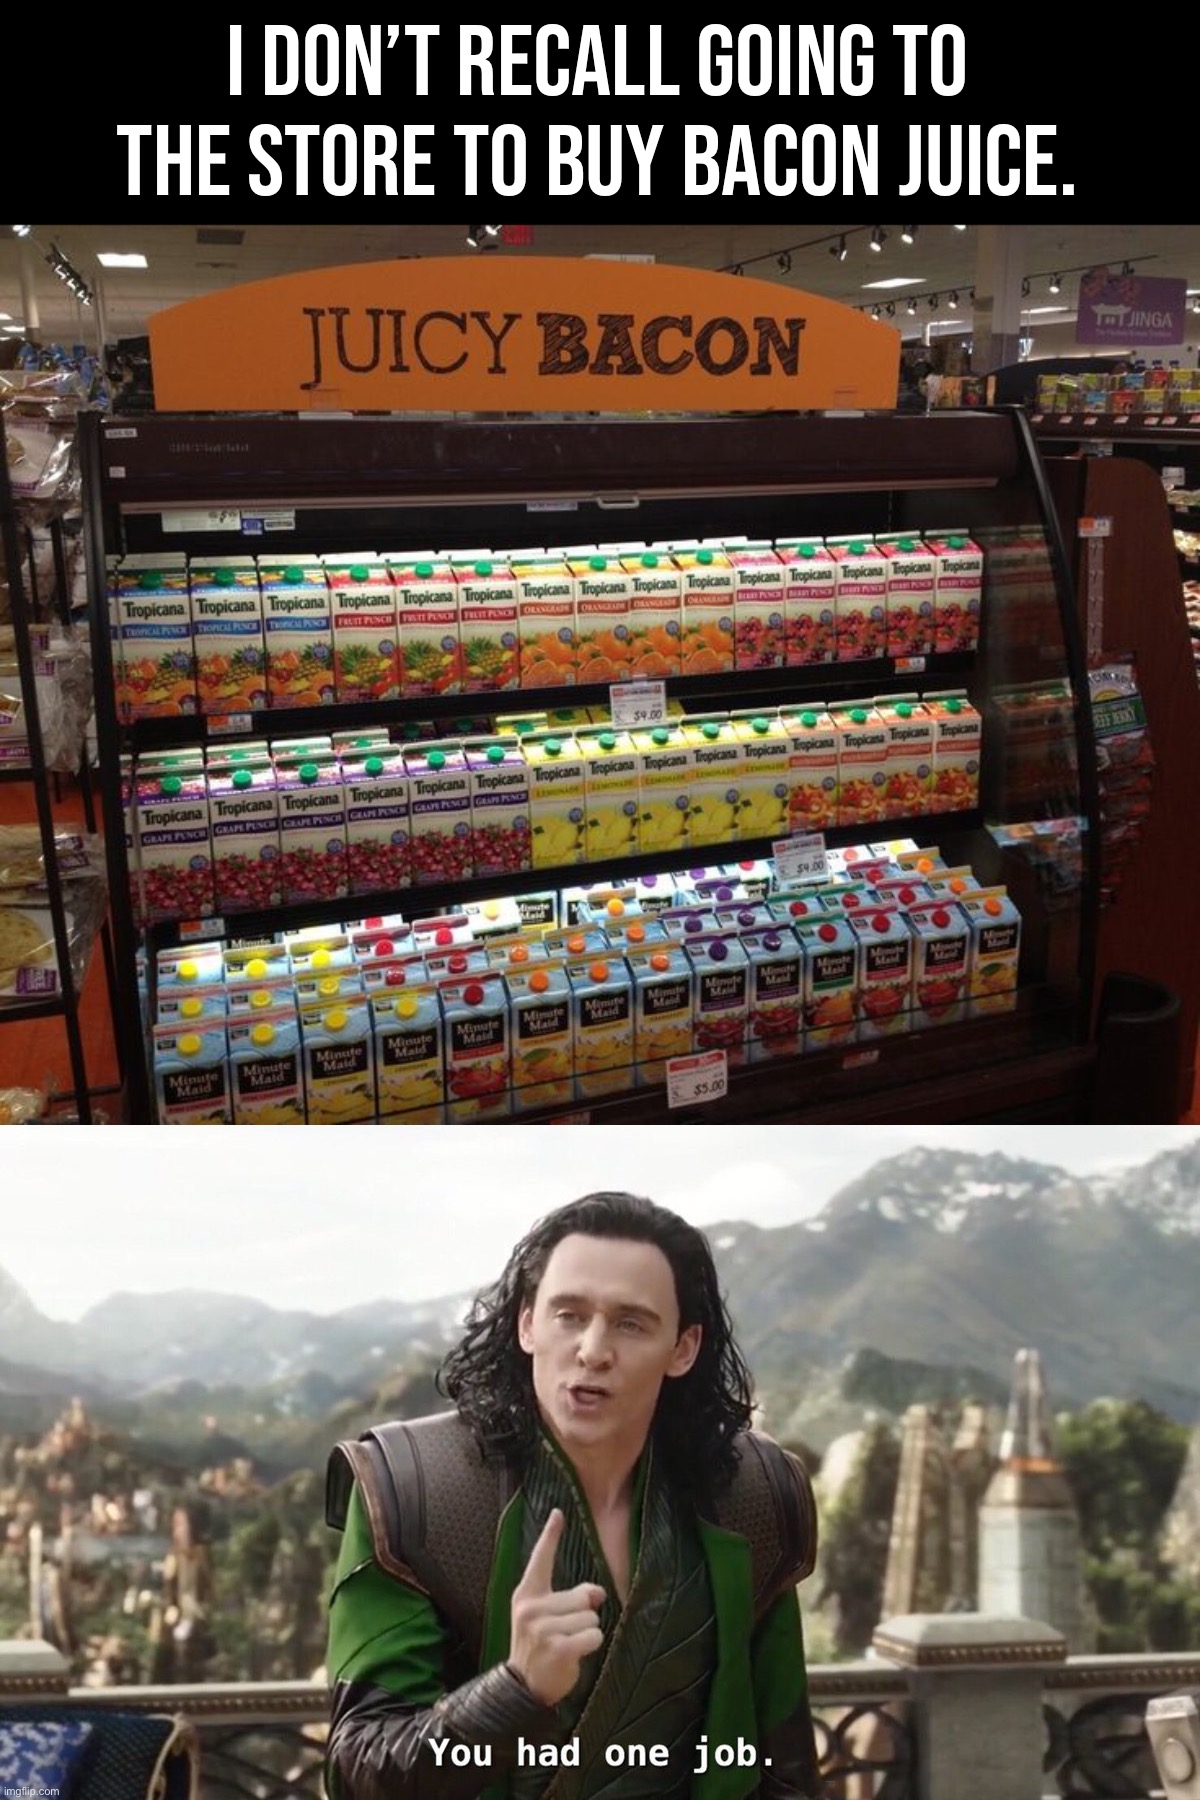 New flavor of juice: bacon juice |  I DON’T RECALL GOING TO THE STORE TO BUY BACON JUICE. | image tagged in you had one job just the one,memes,funny,oh wow,stupid,juice | made w/ Imgflip meme maker